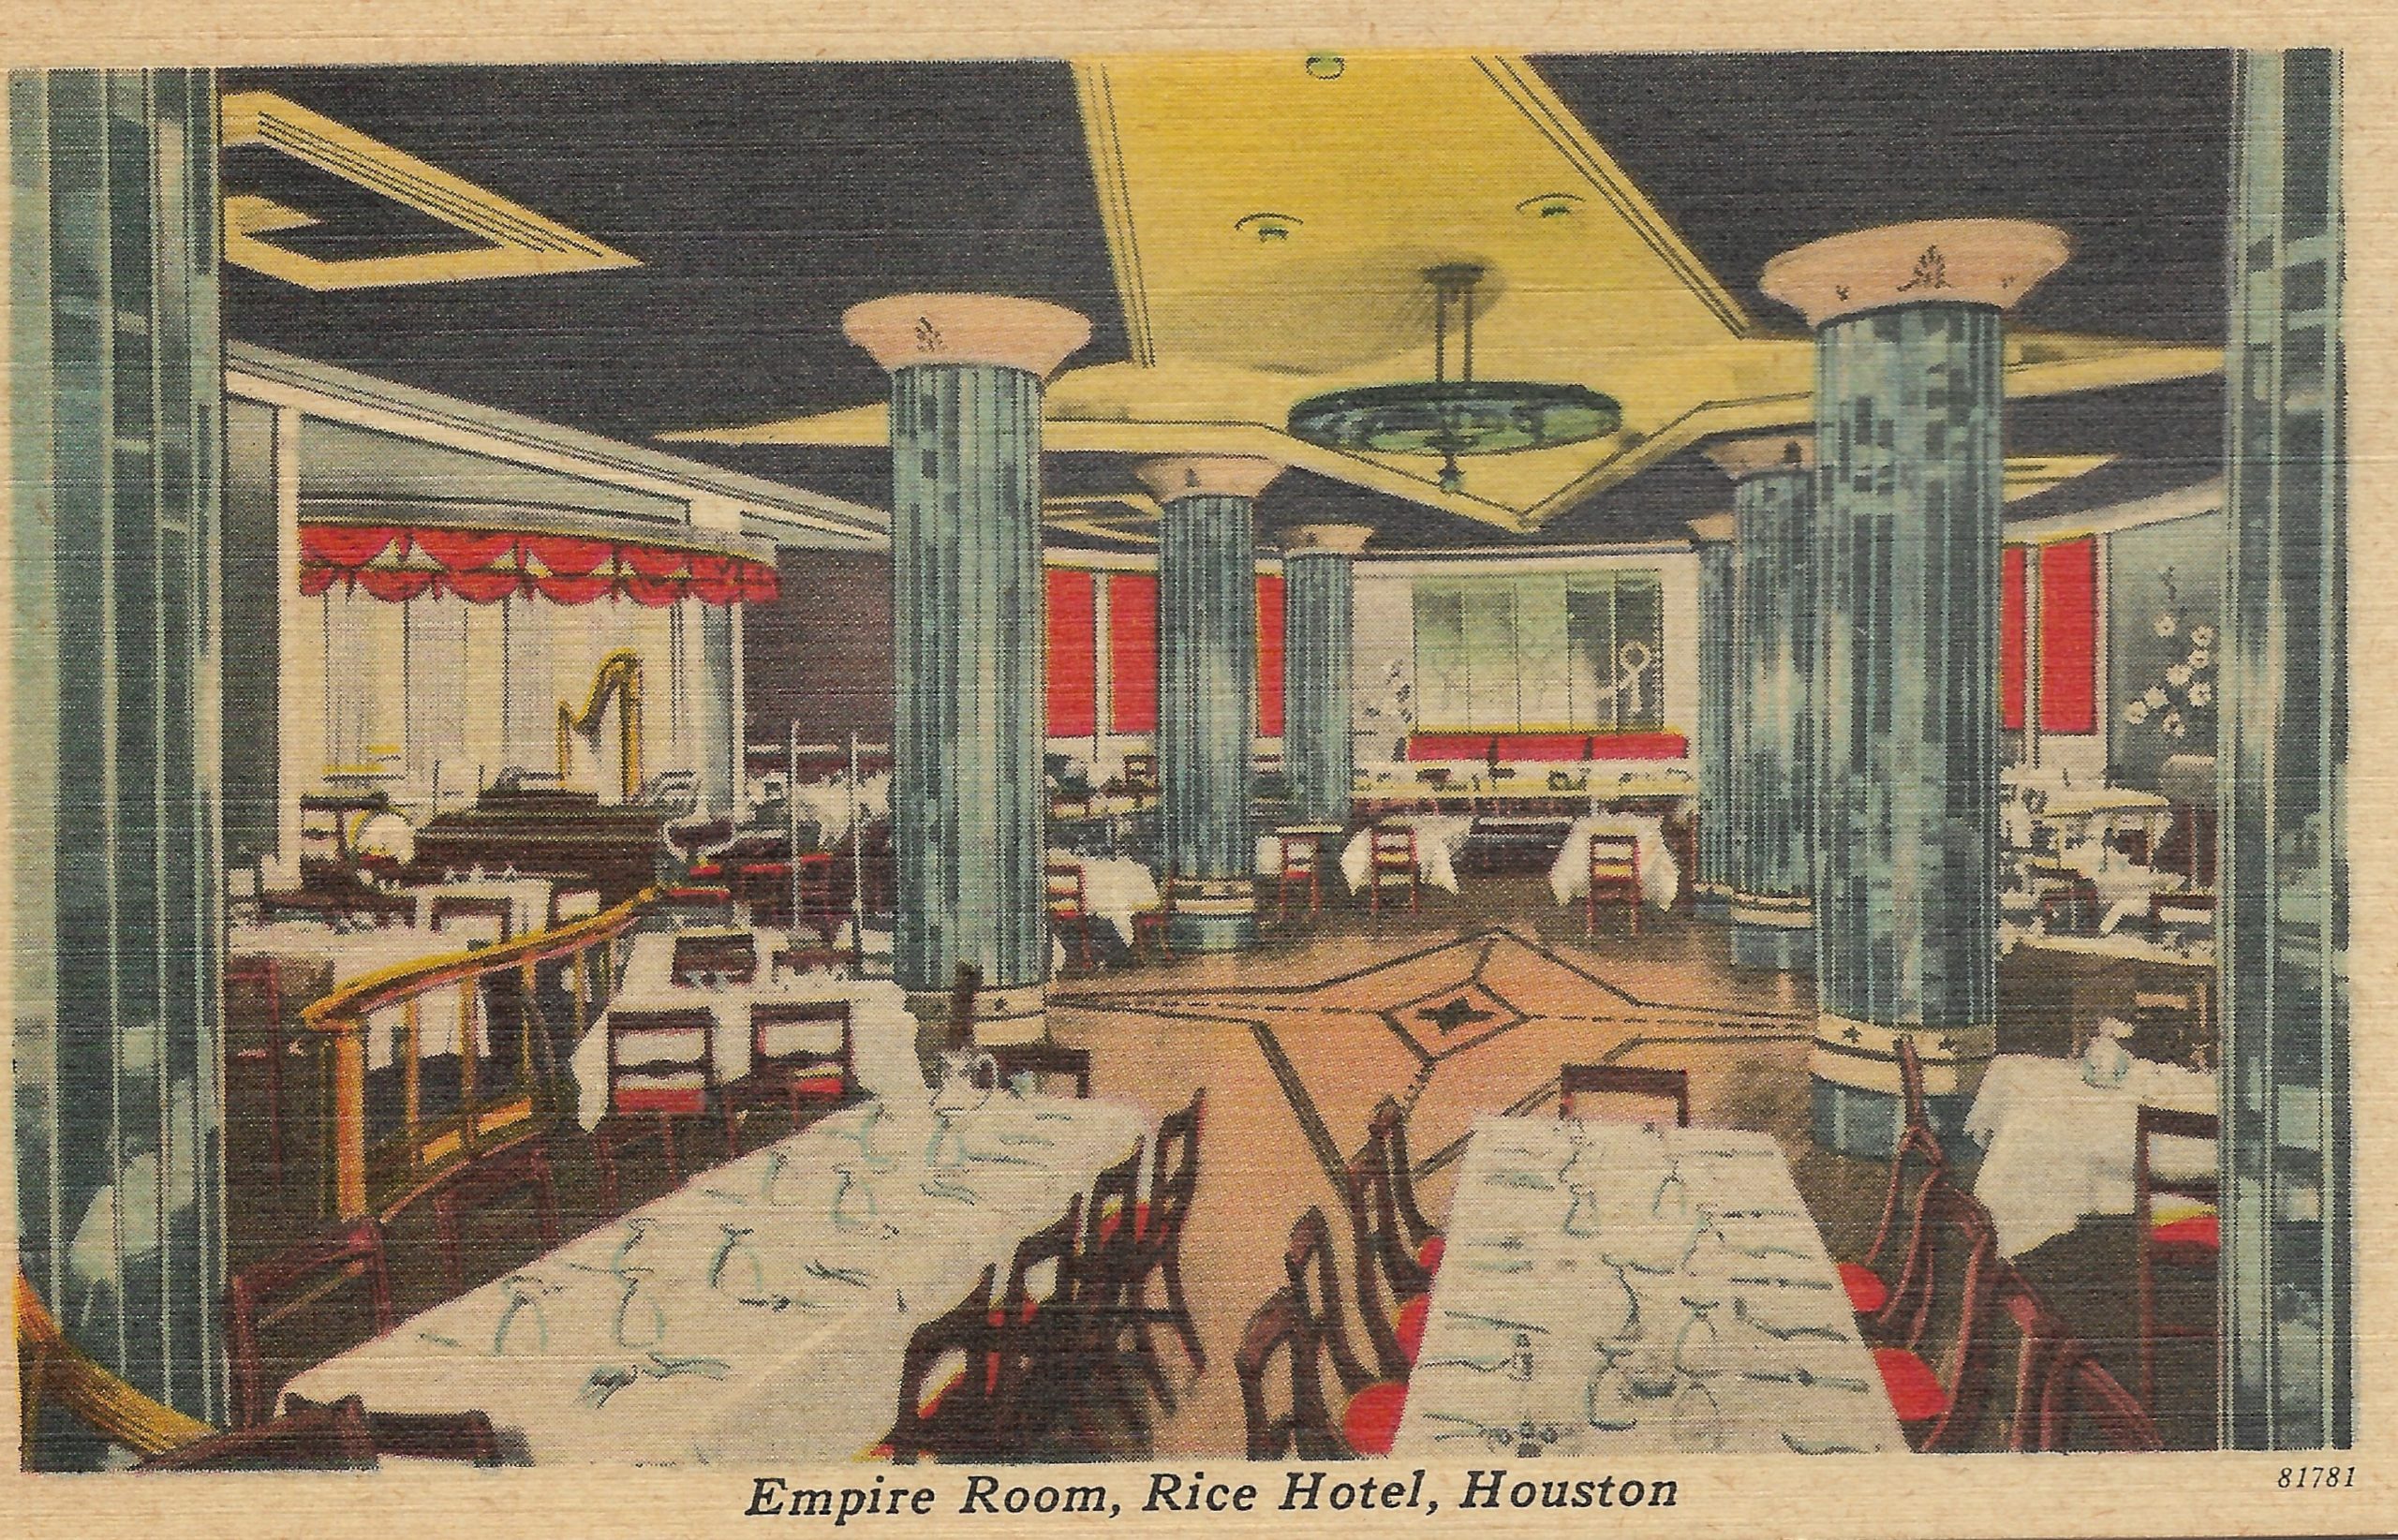 The Empire Room at the Rice Hotel